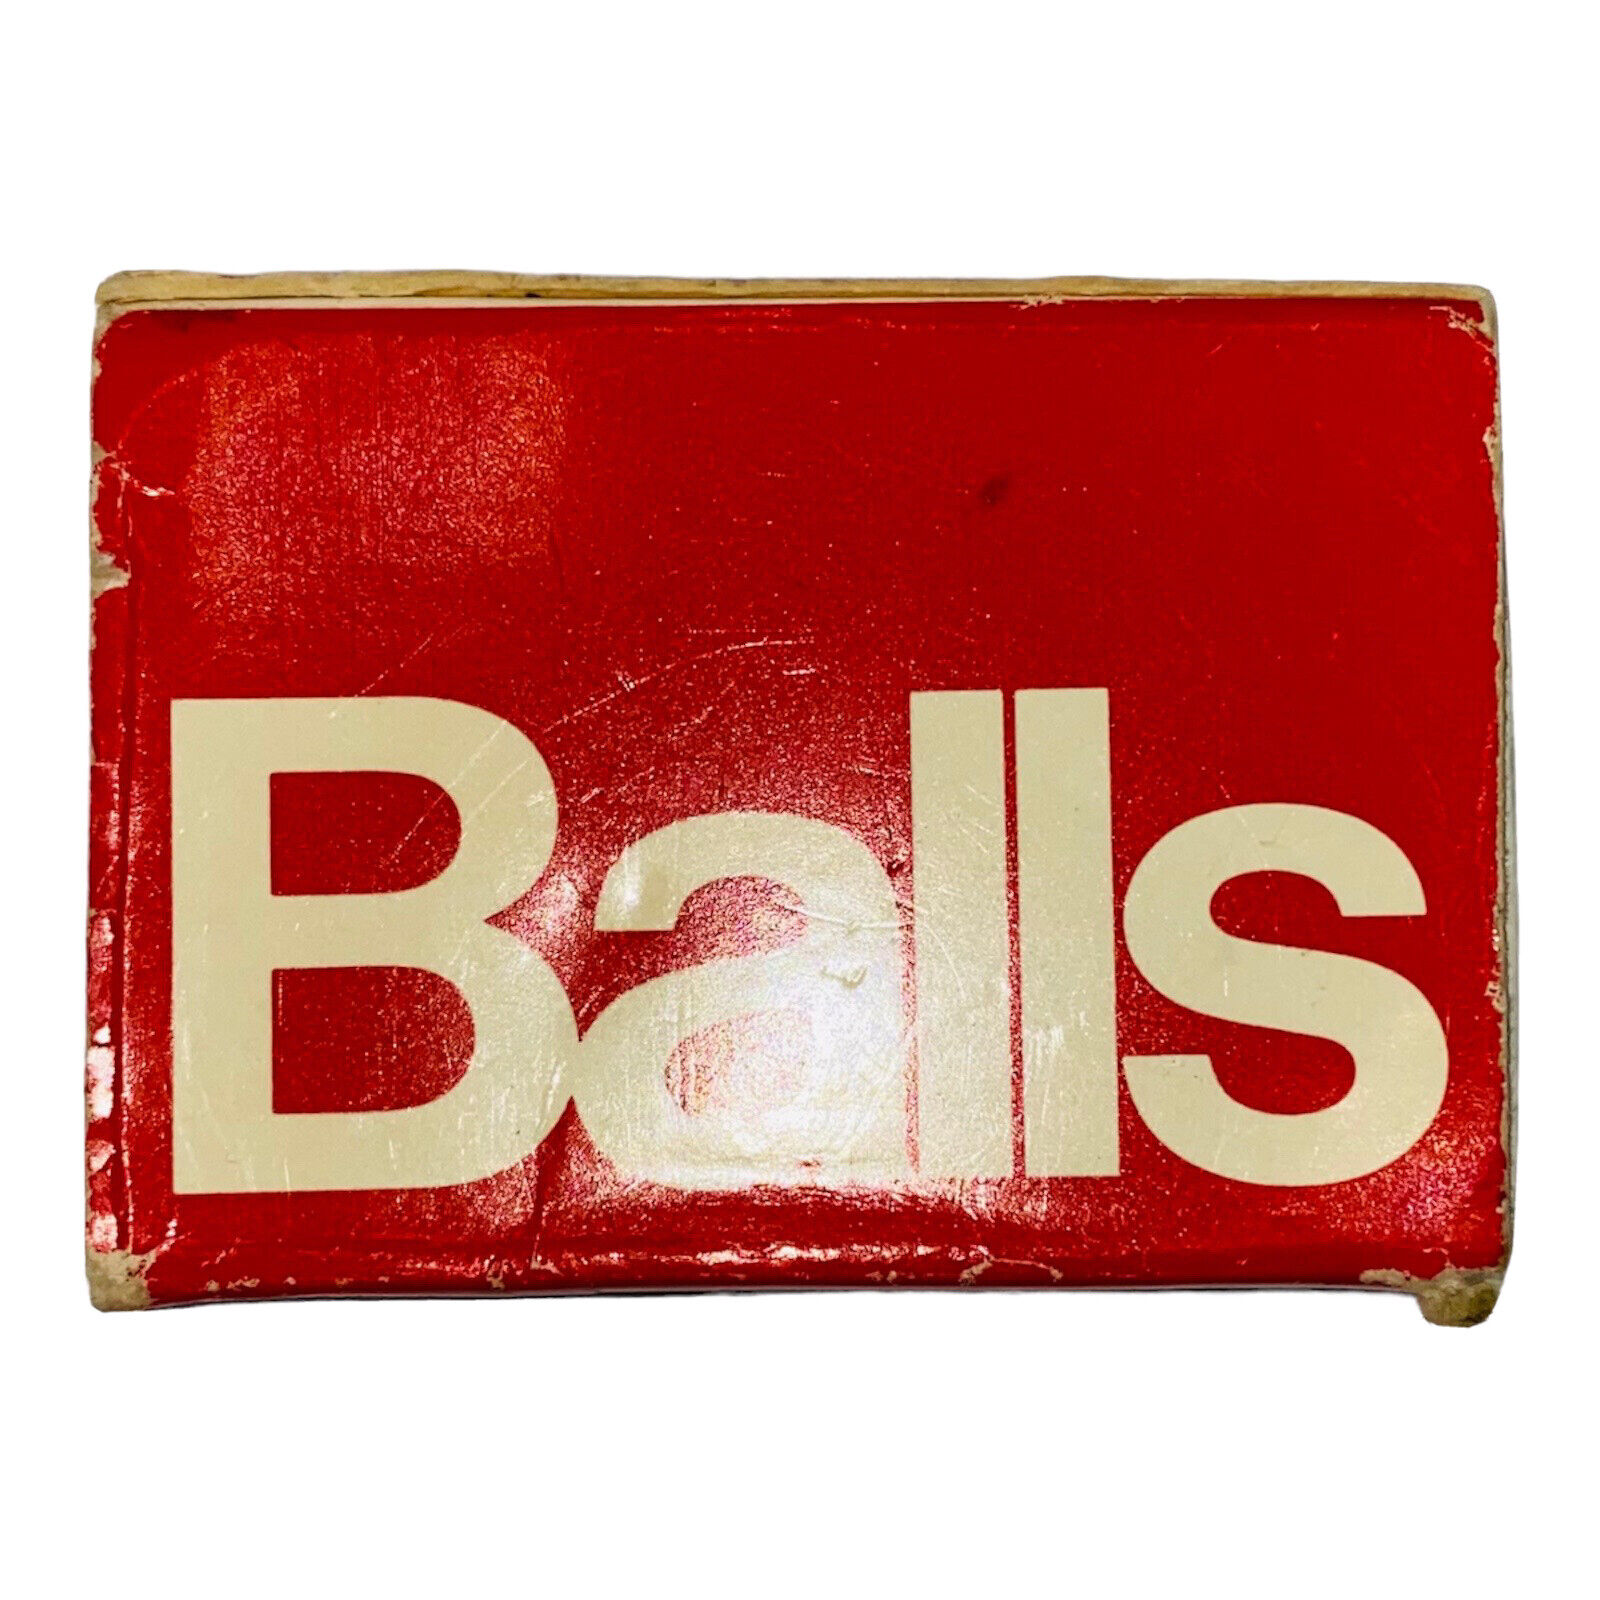 Vintage 1983 BALLS Match Box Matchbook With Matches by Peacock Papers Inc. 703